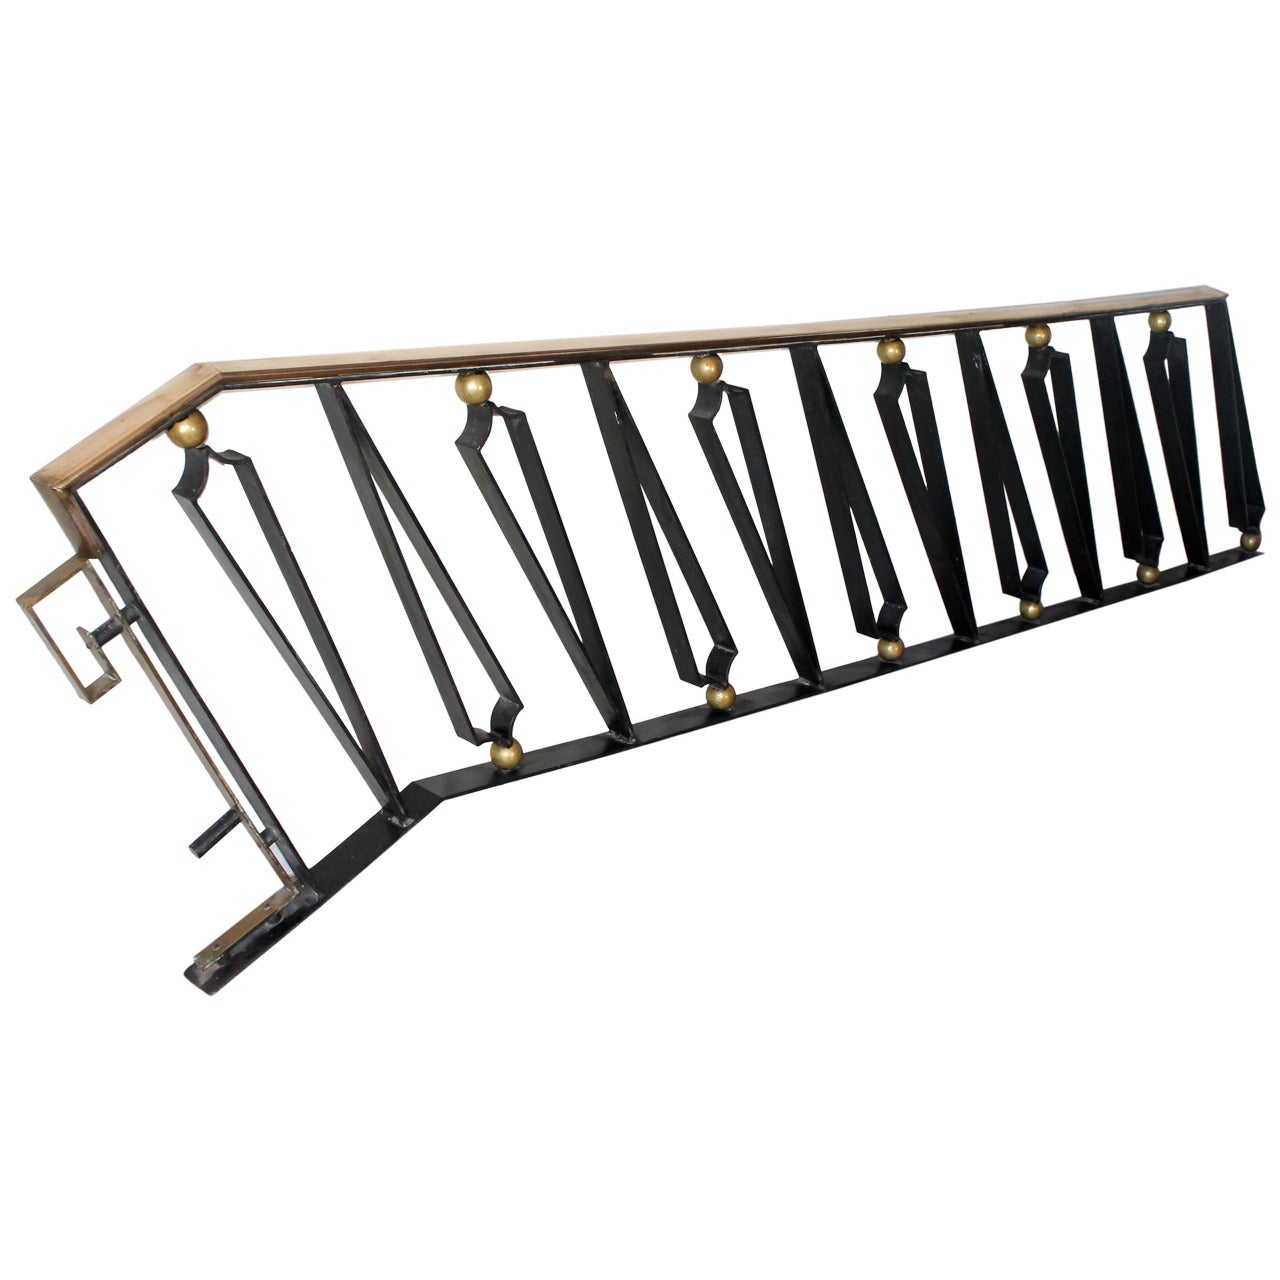 Forged Iron and Brass Handrail by Arturo Pani, Mexico City 1940s For Sale